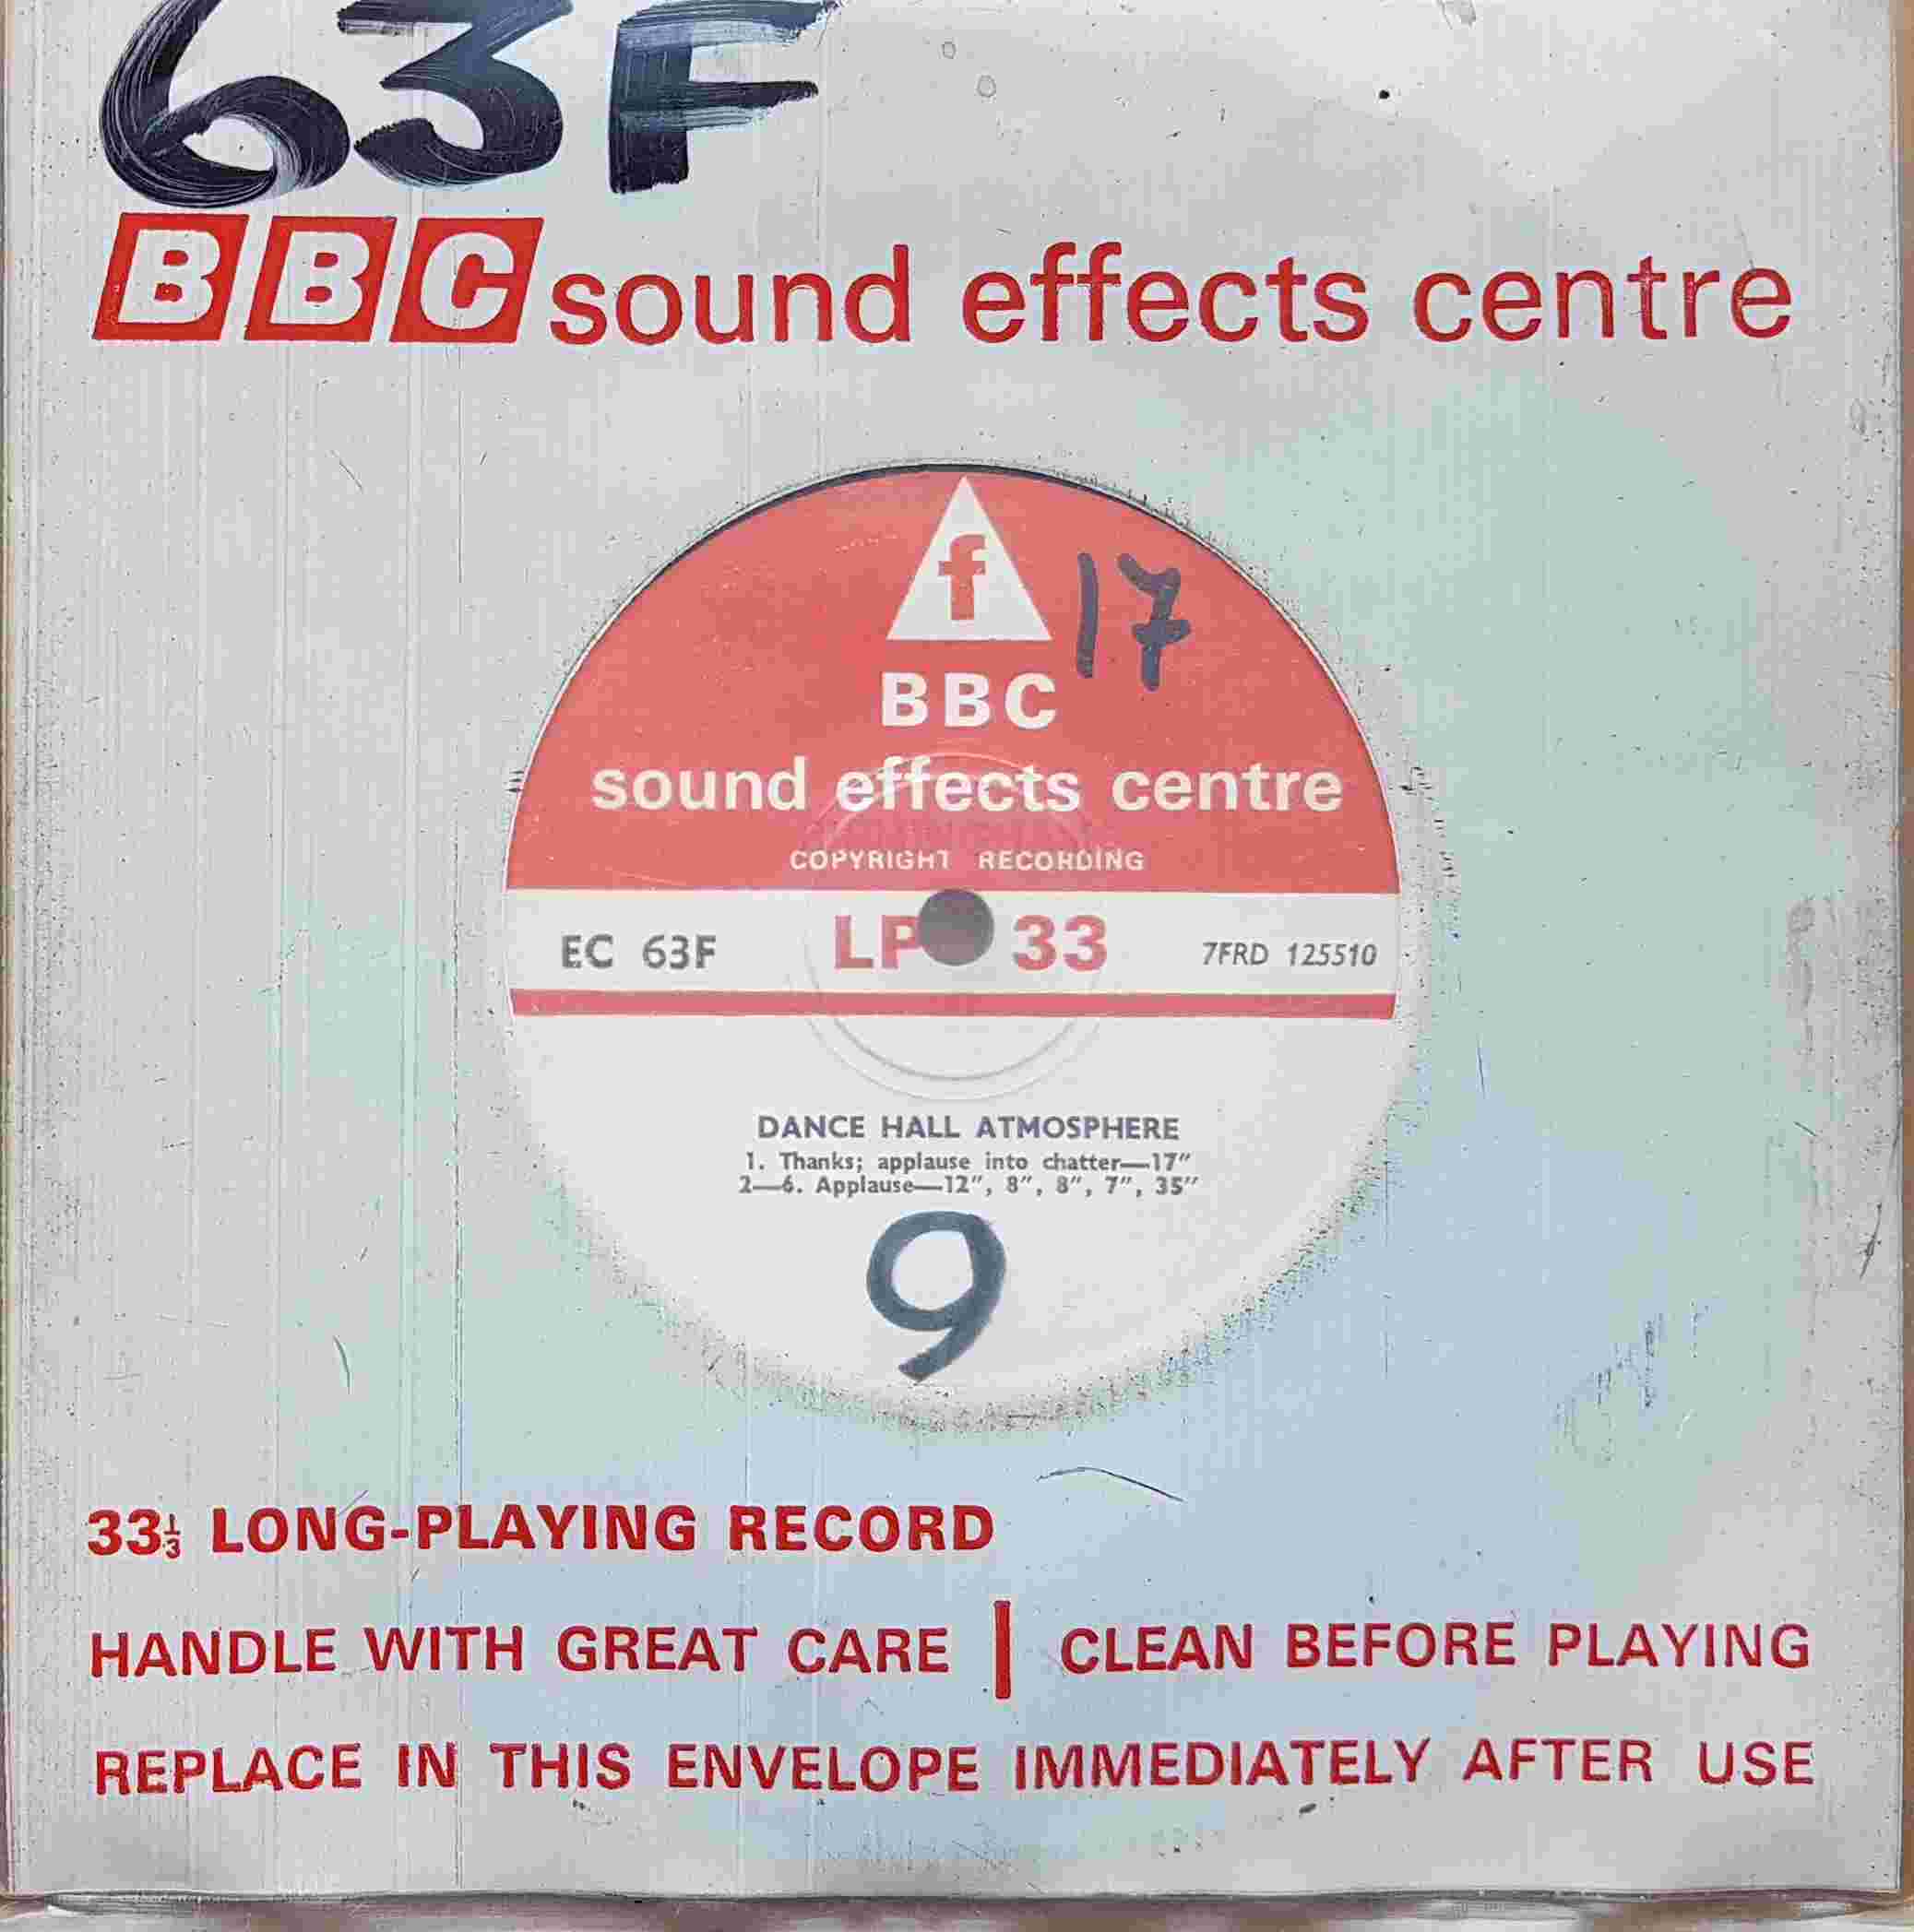 Picture of EC 63F Dance Hall atmosphere by artist Not registered from the BBC singles - Records and Tapes library